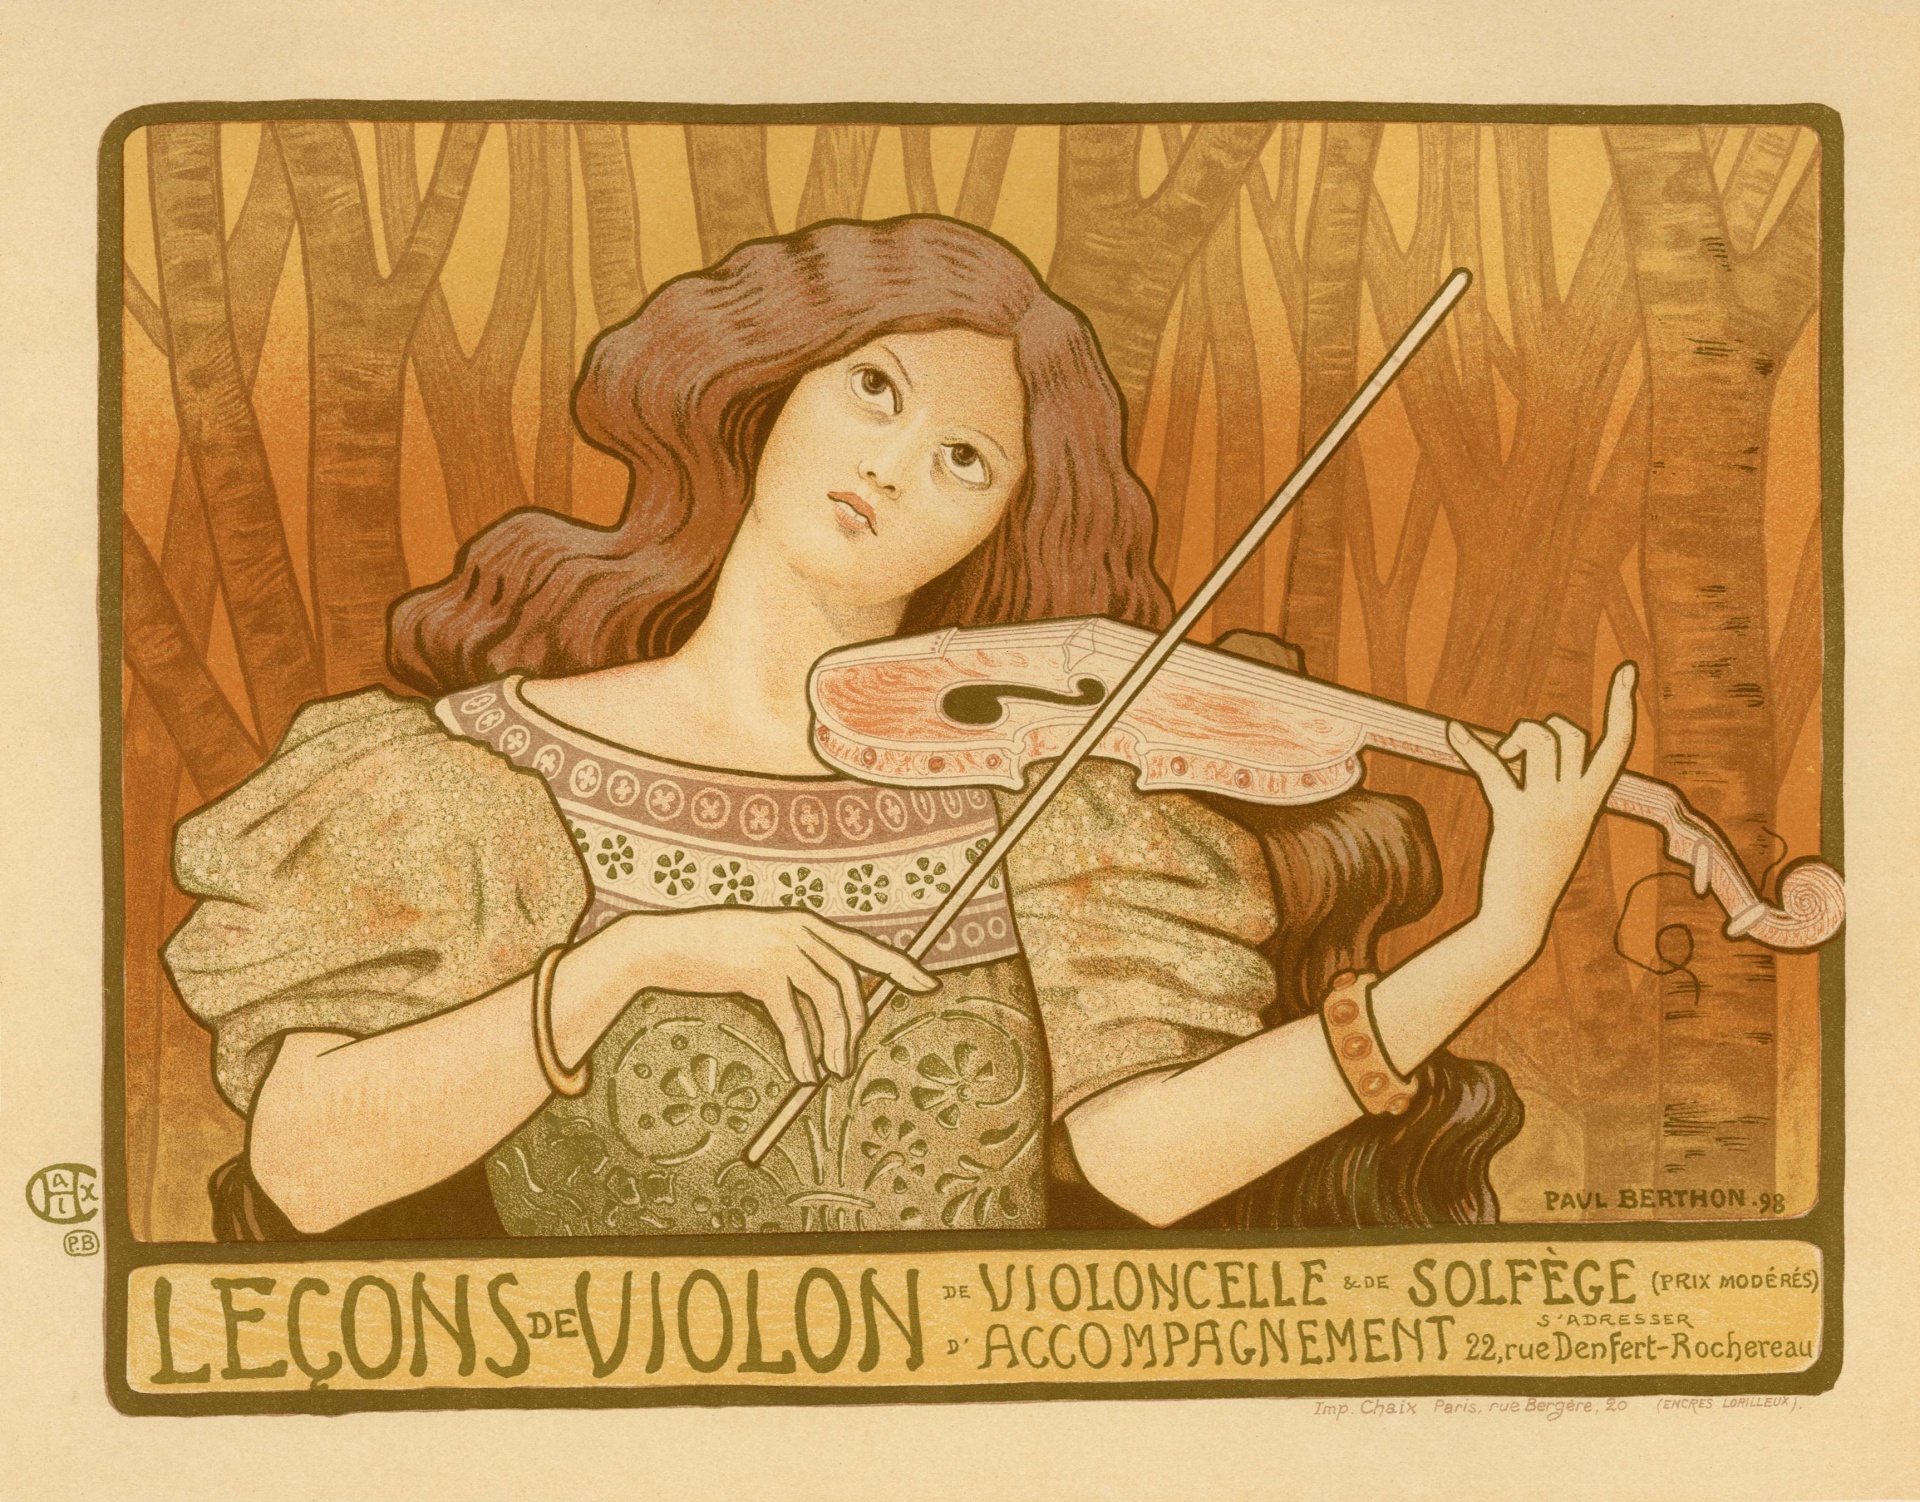 French Vintage Poster Advertising for Violin Performance Art Deco and Art Nouveau Lady in the Wood with violin